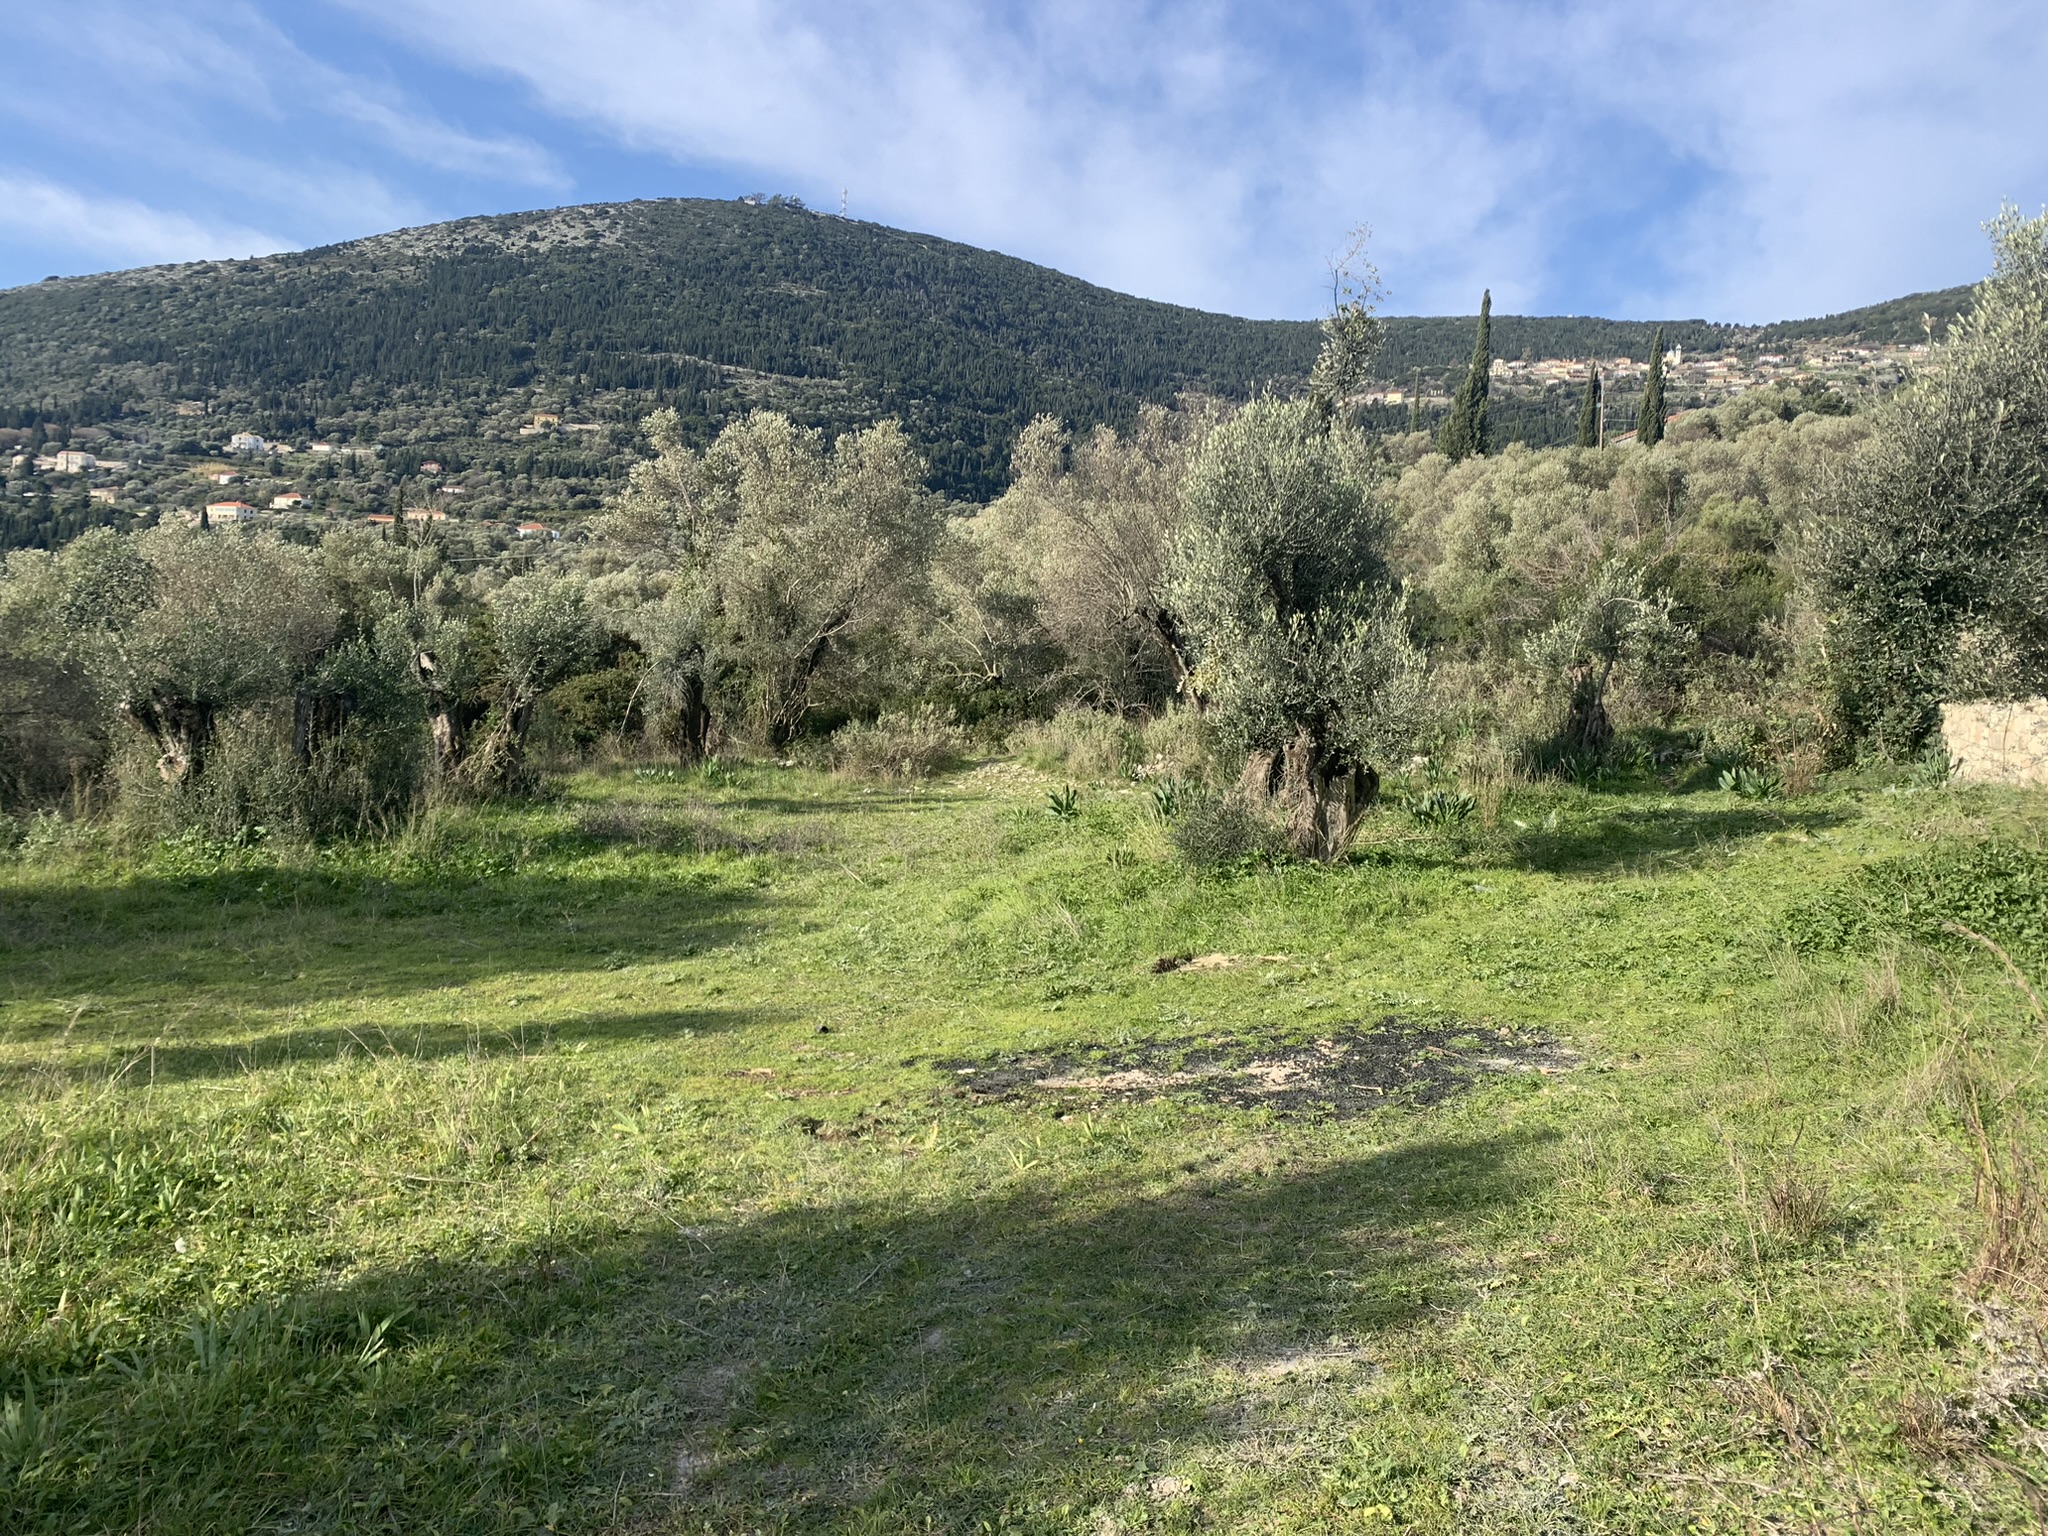 Terrain and landscape of land for sale Ithaca Greece Lahos